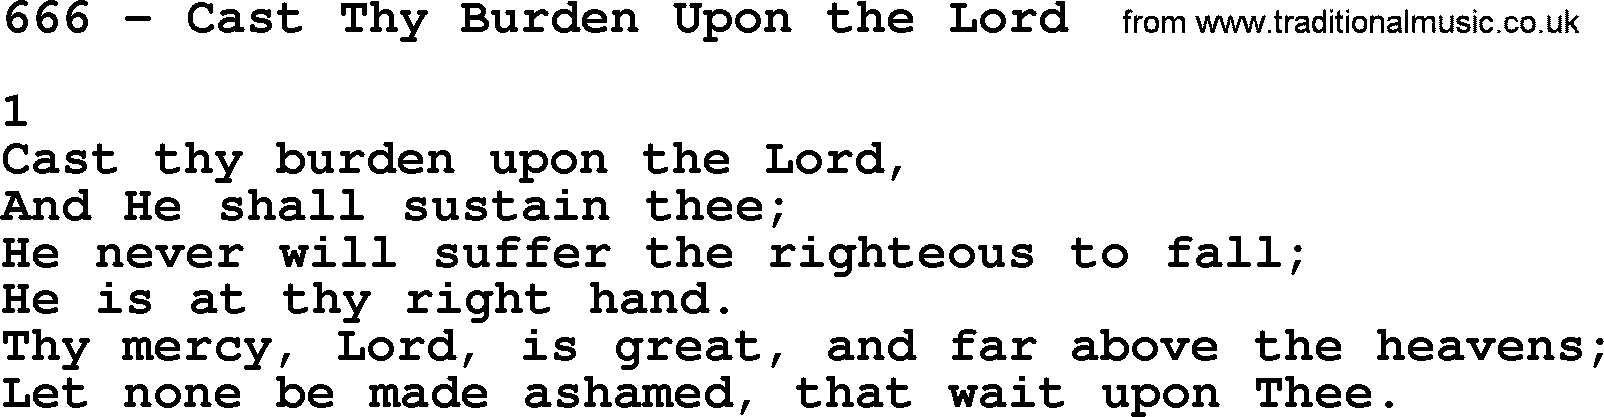 Complete Adventis Hymnal, title: 666-Cast Thy Burden Upon The Lord, with lyrics, midi, mp3, powerpoints(PPT) and PDF,